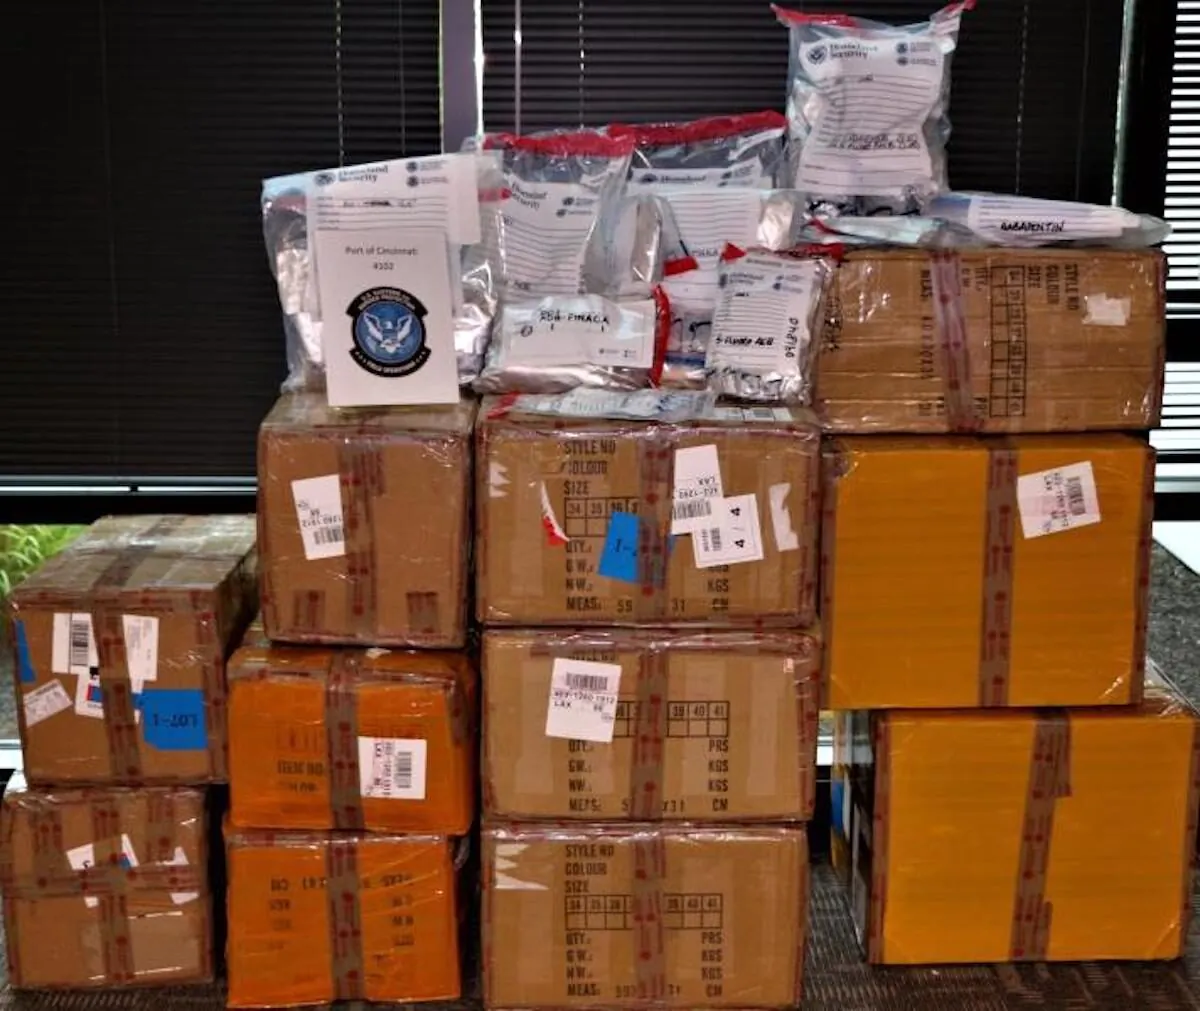 Synthetic drugs and controlled substances seized by U.S. Customs and Border Patrol in Cincinatti, Ohio, on May 11, 2020. (CBP Cincinnati)